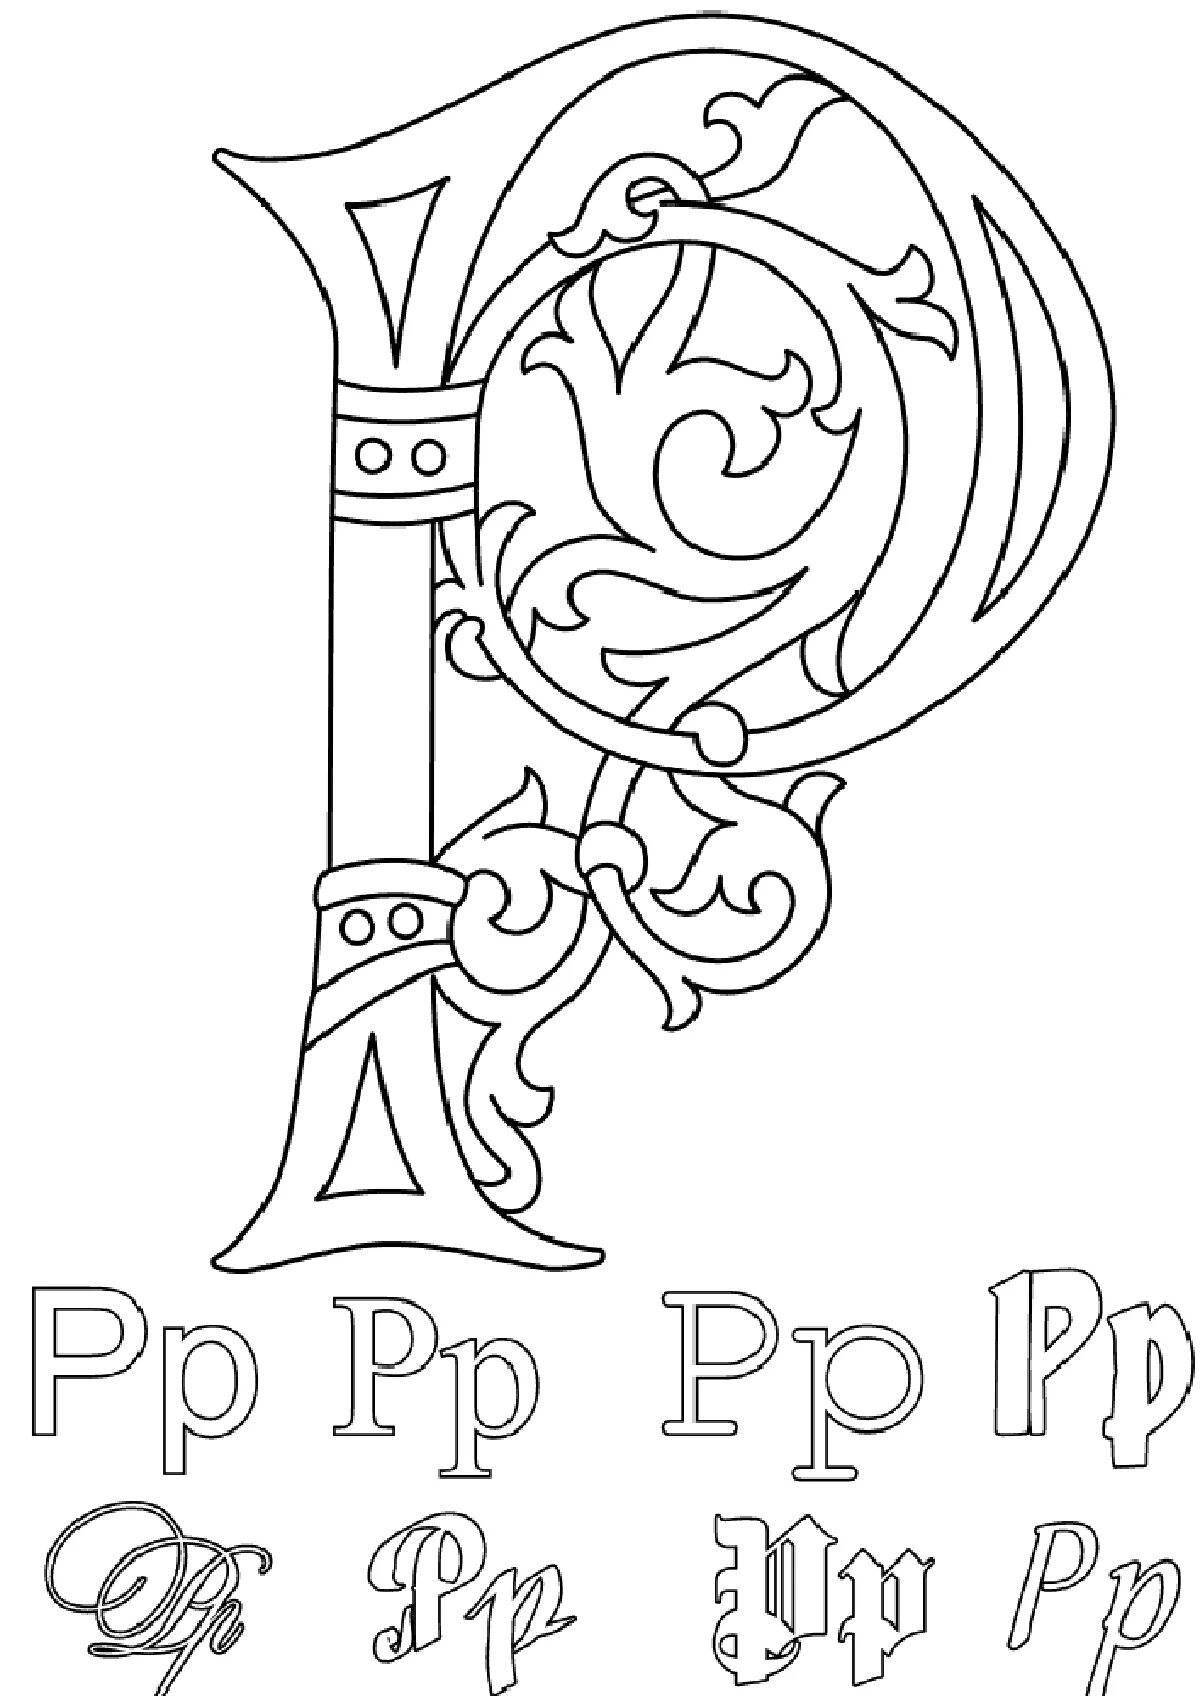 A fascinating coloring book of the Orthodox alphabet